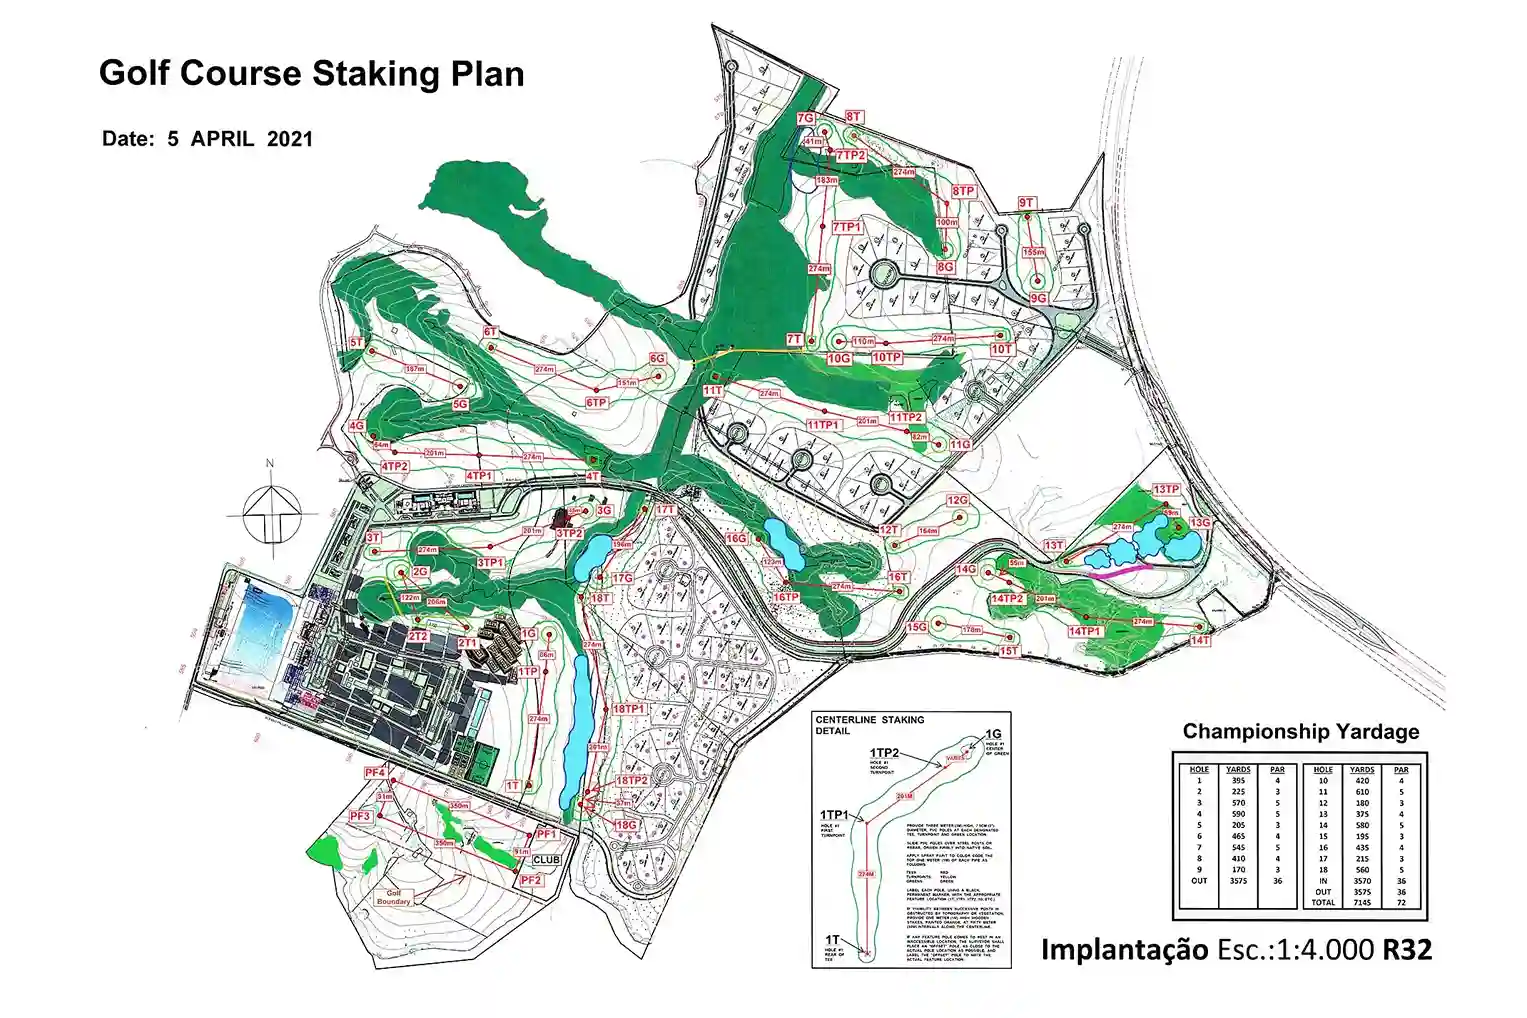 Golf Staking Plan, Cad Design and Drafting Services